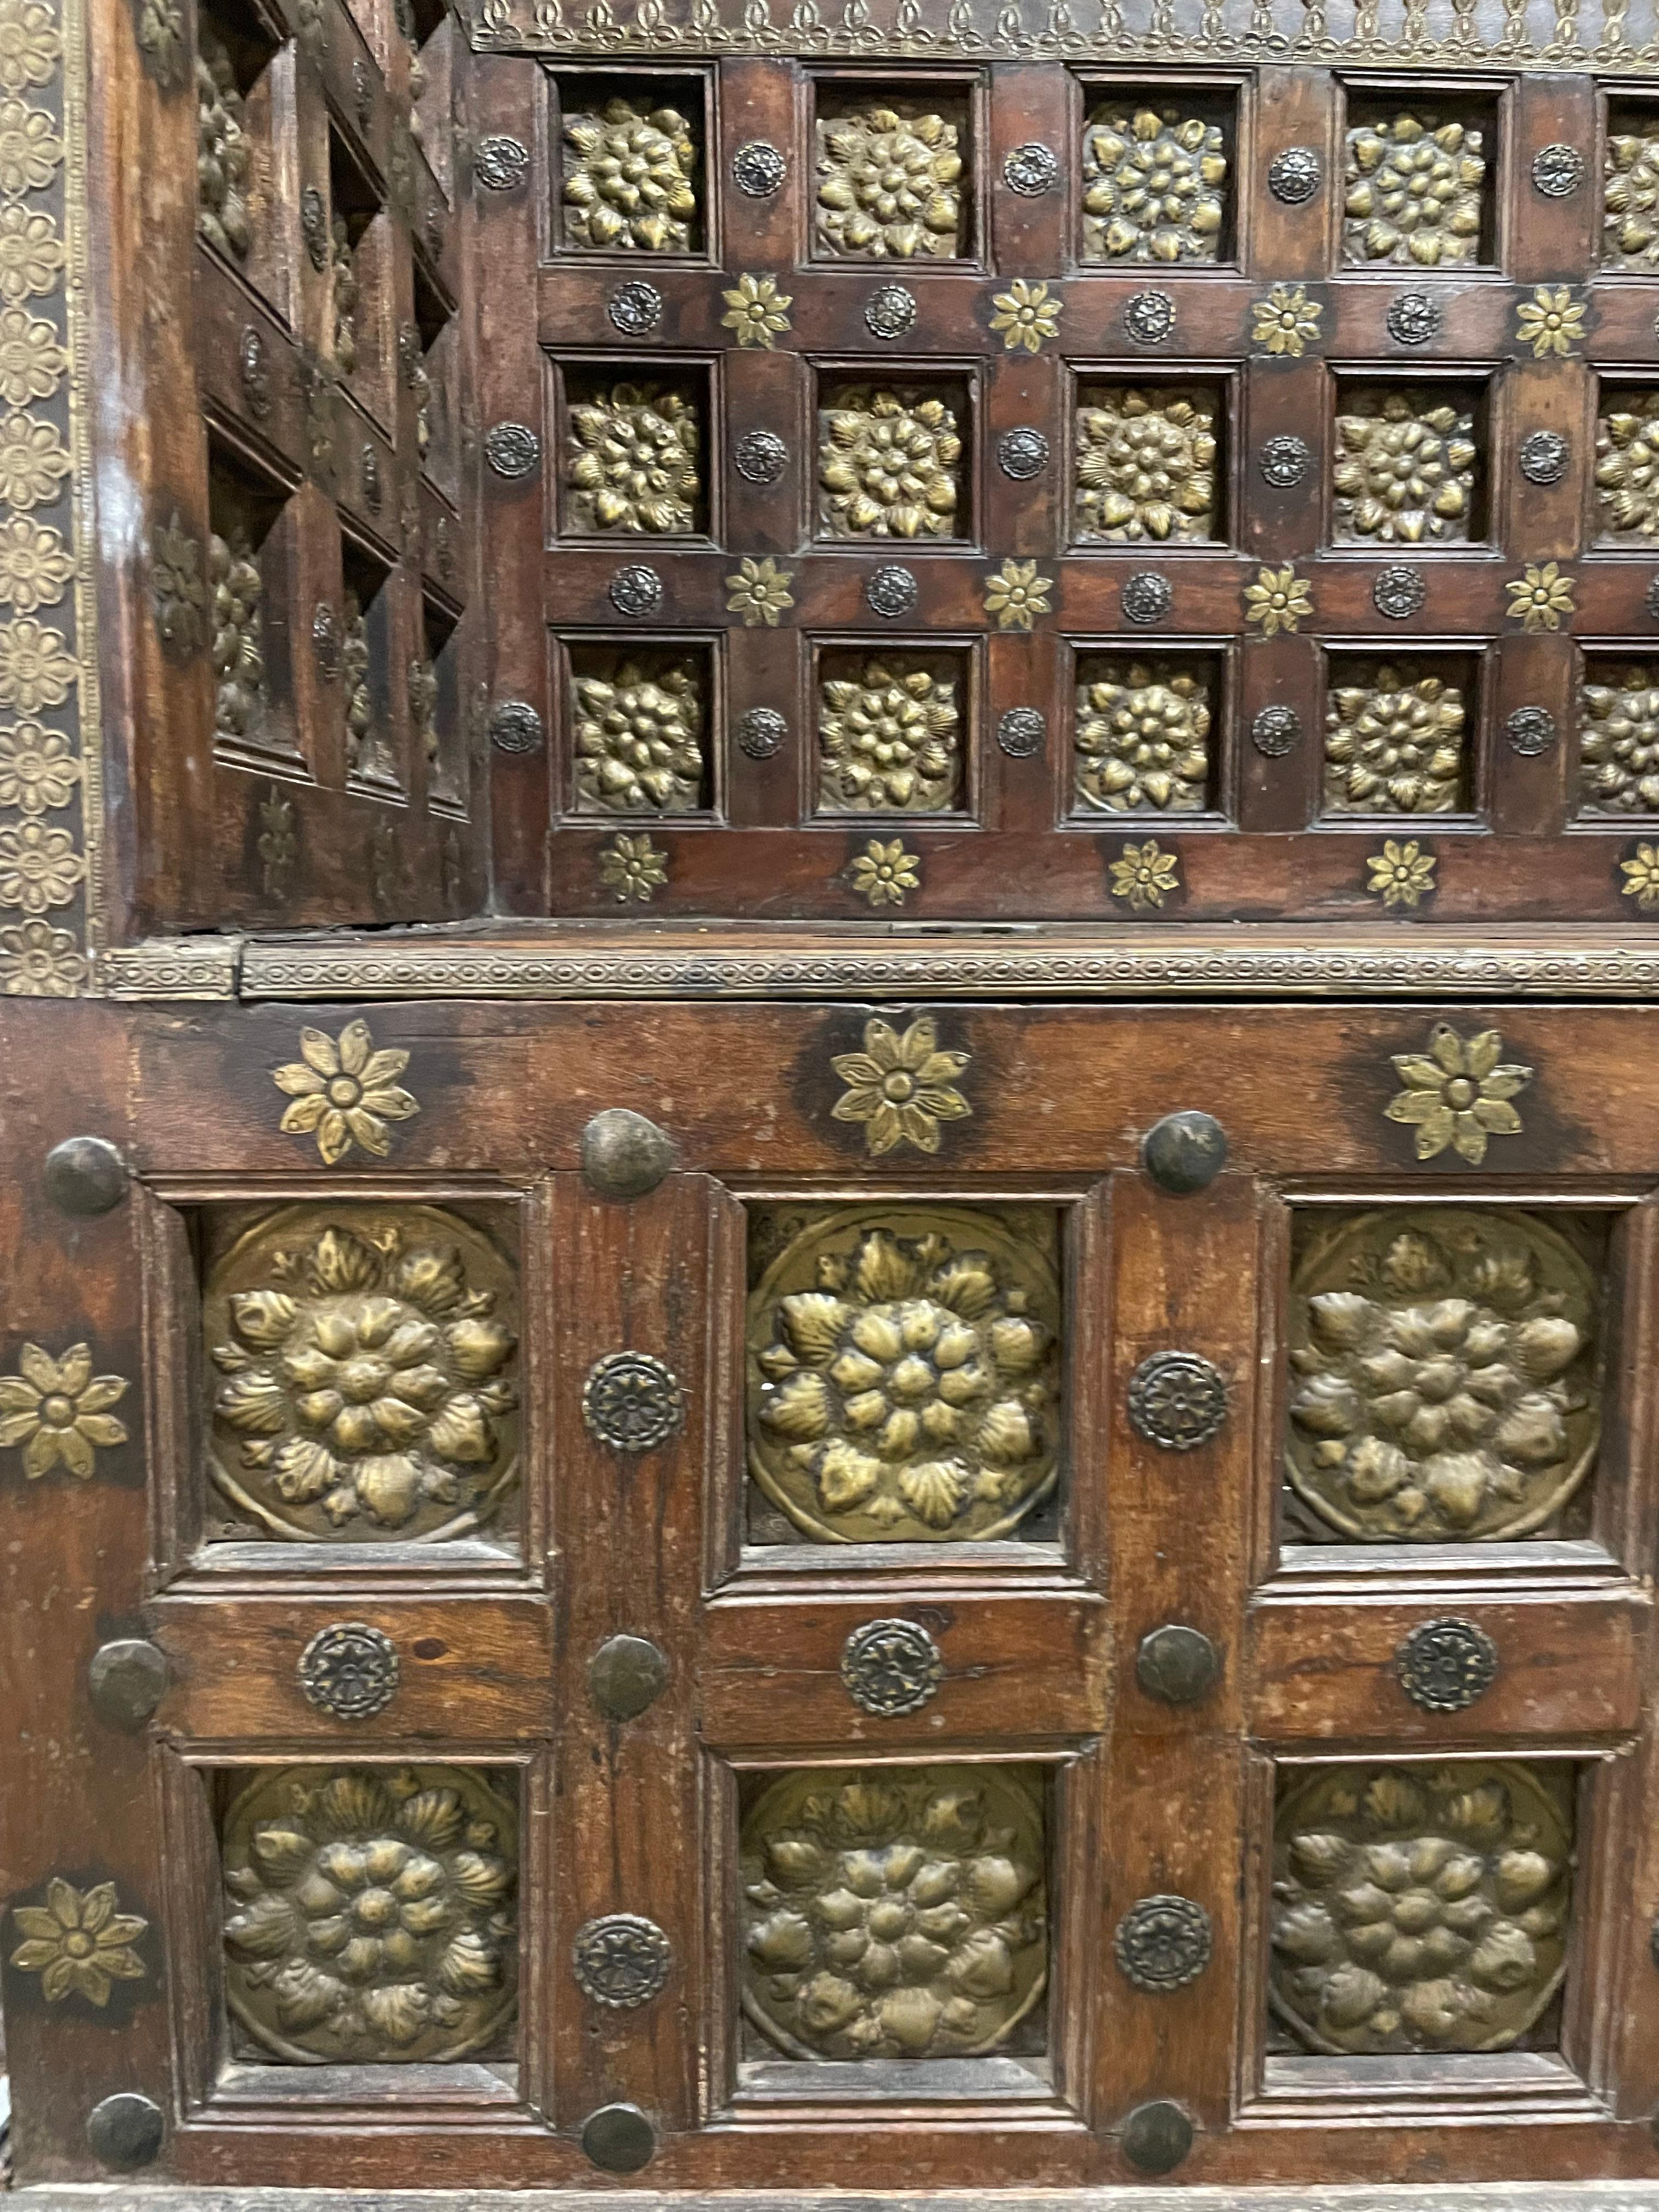 19th century Rajasthani wooden bench chest, carved and partitioned decorated with bronze rosette, opening the chest on the seat of the bench.